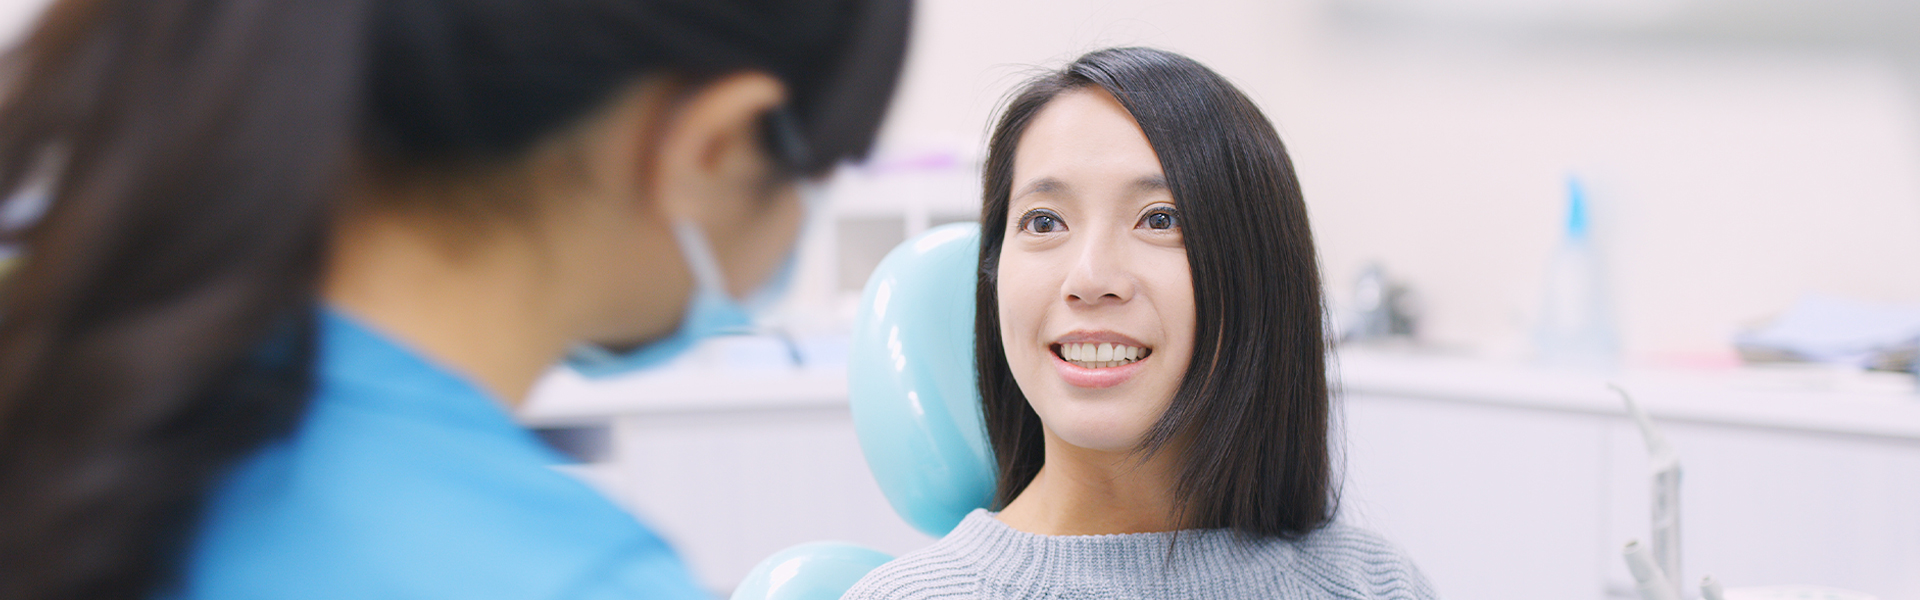 Do You Know What Happens during Dental Exams and Cleanings?